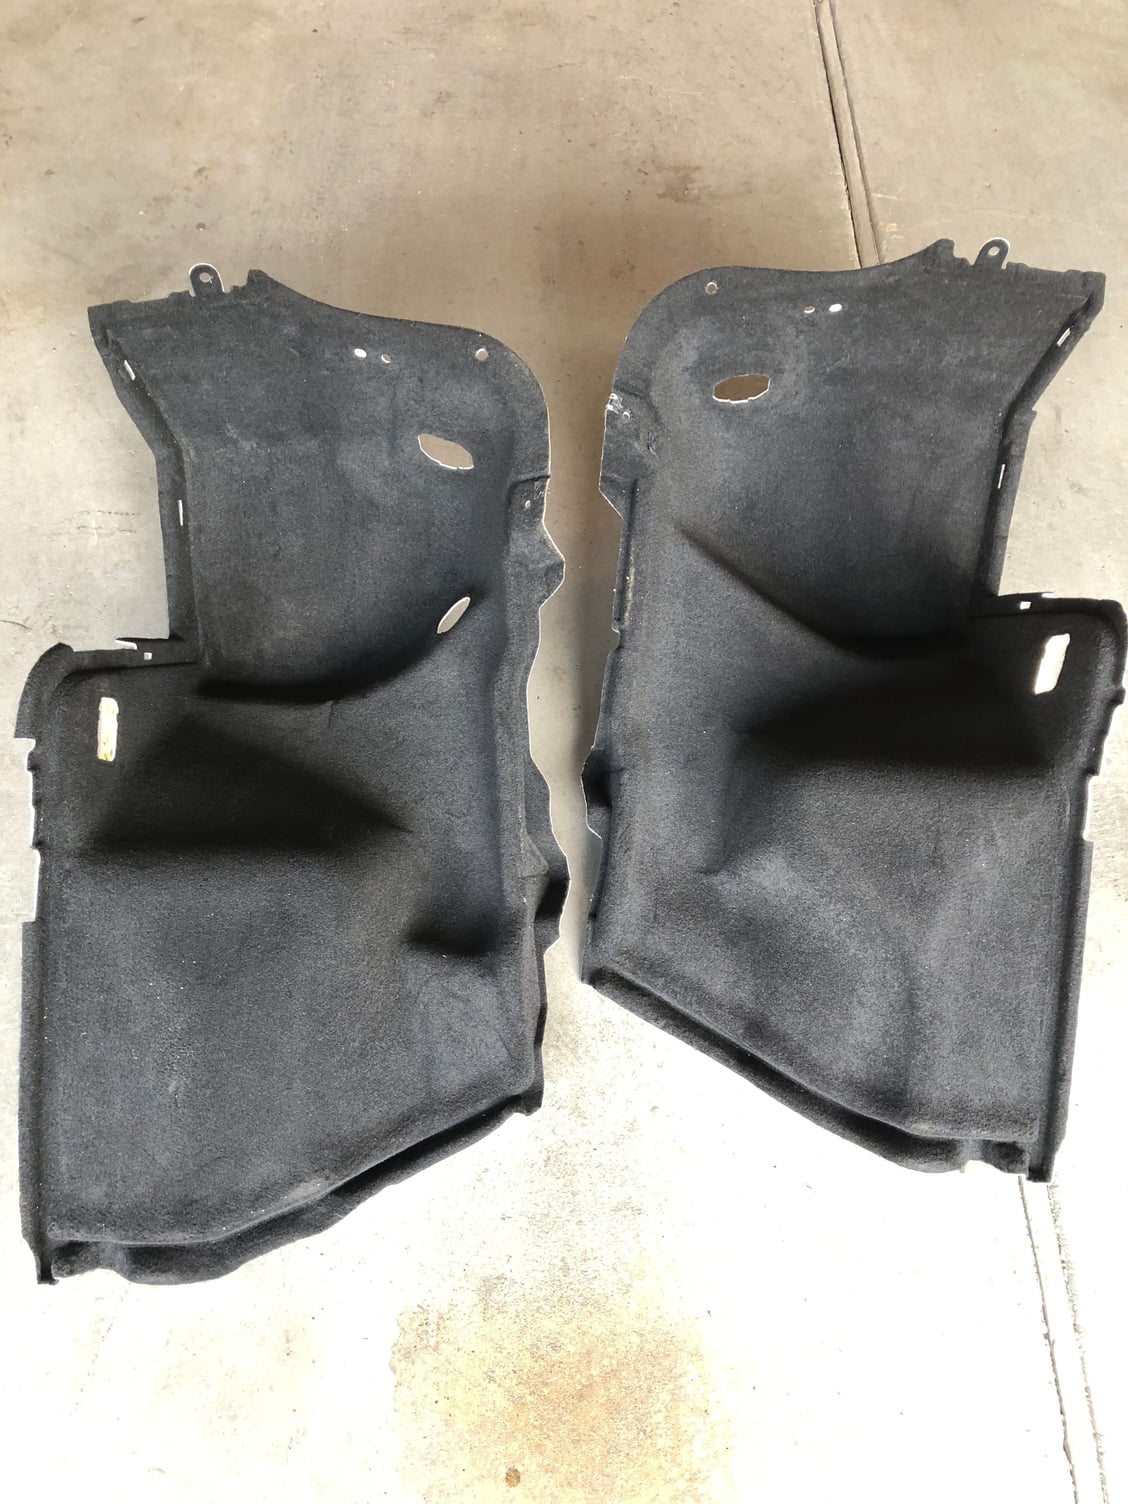 Interior/Upholstery - Many parts from my for SALE! - Used - 2006 to 2013 Lexus IS250 - 2006 to 2013 Lexus IS350 - Vallejo, CA 94591, United States